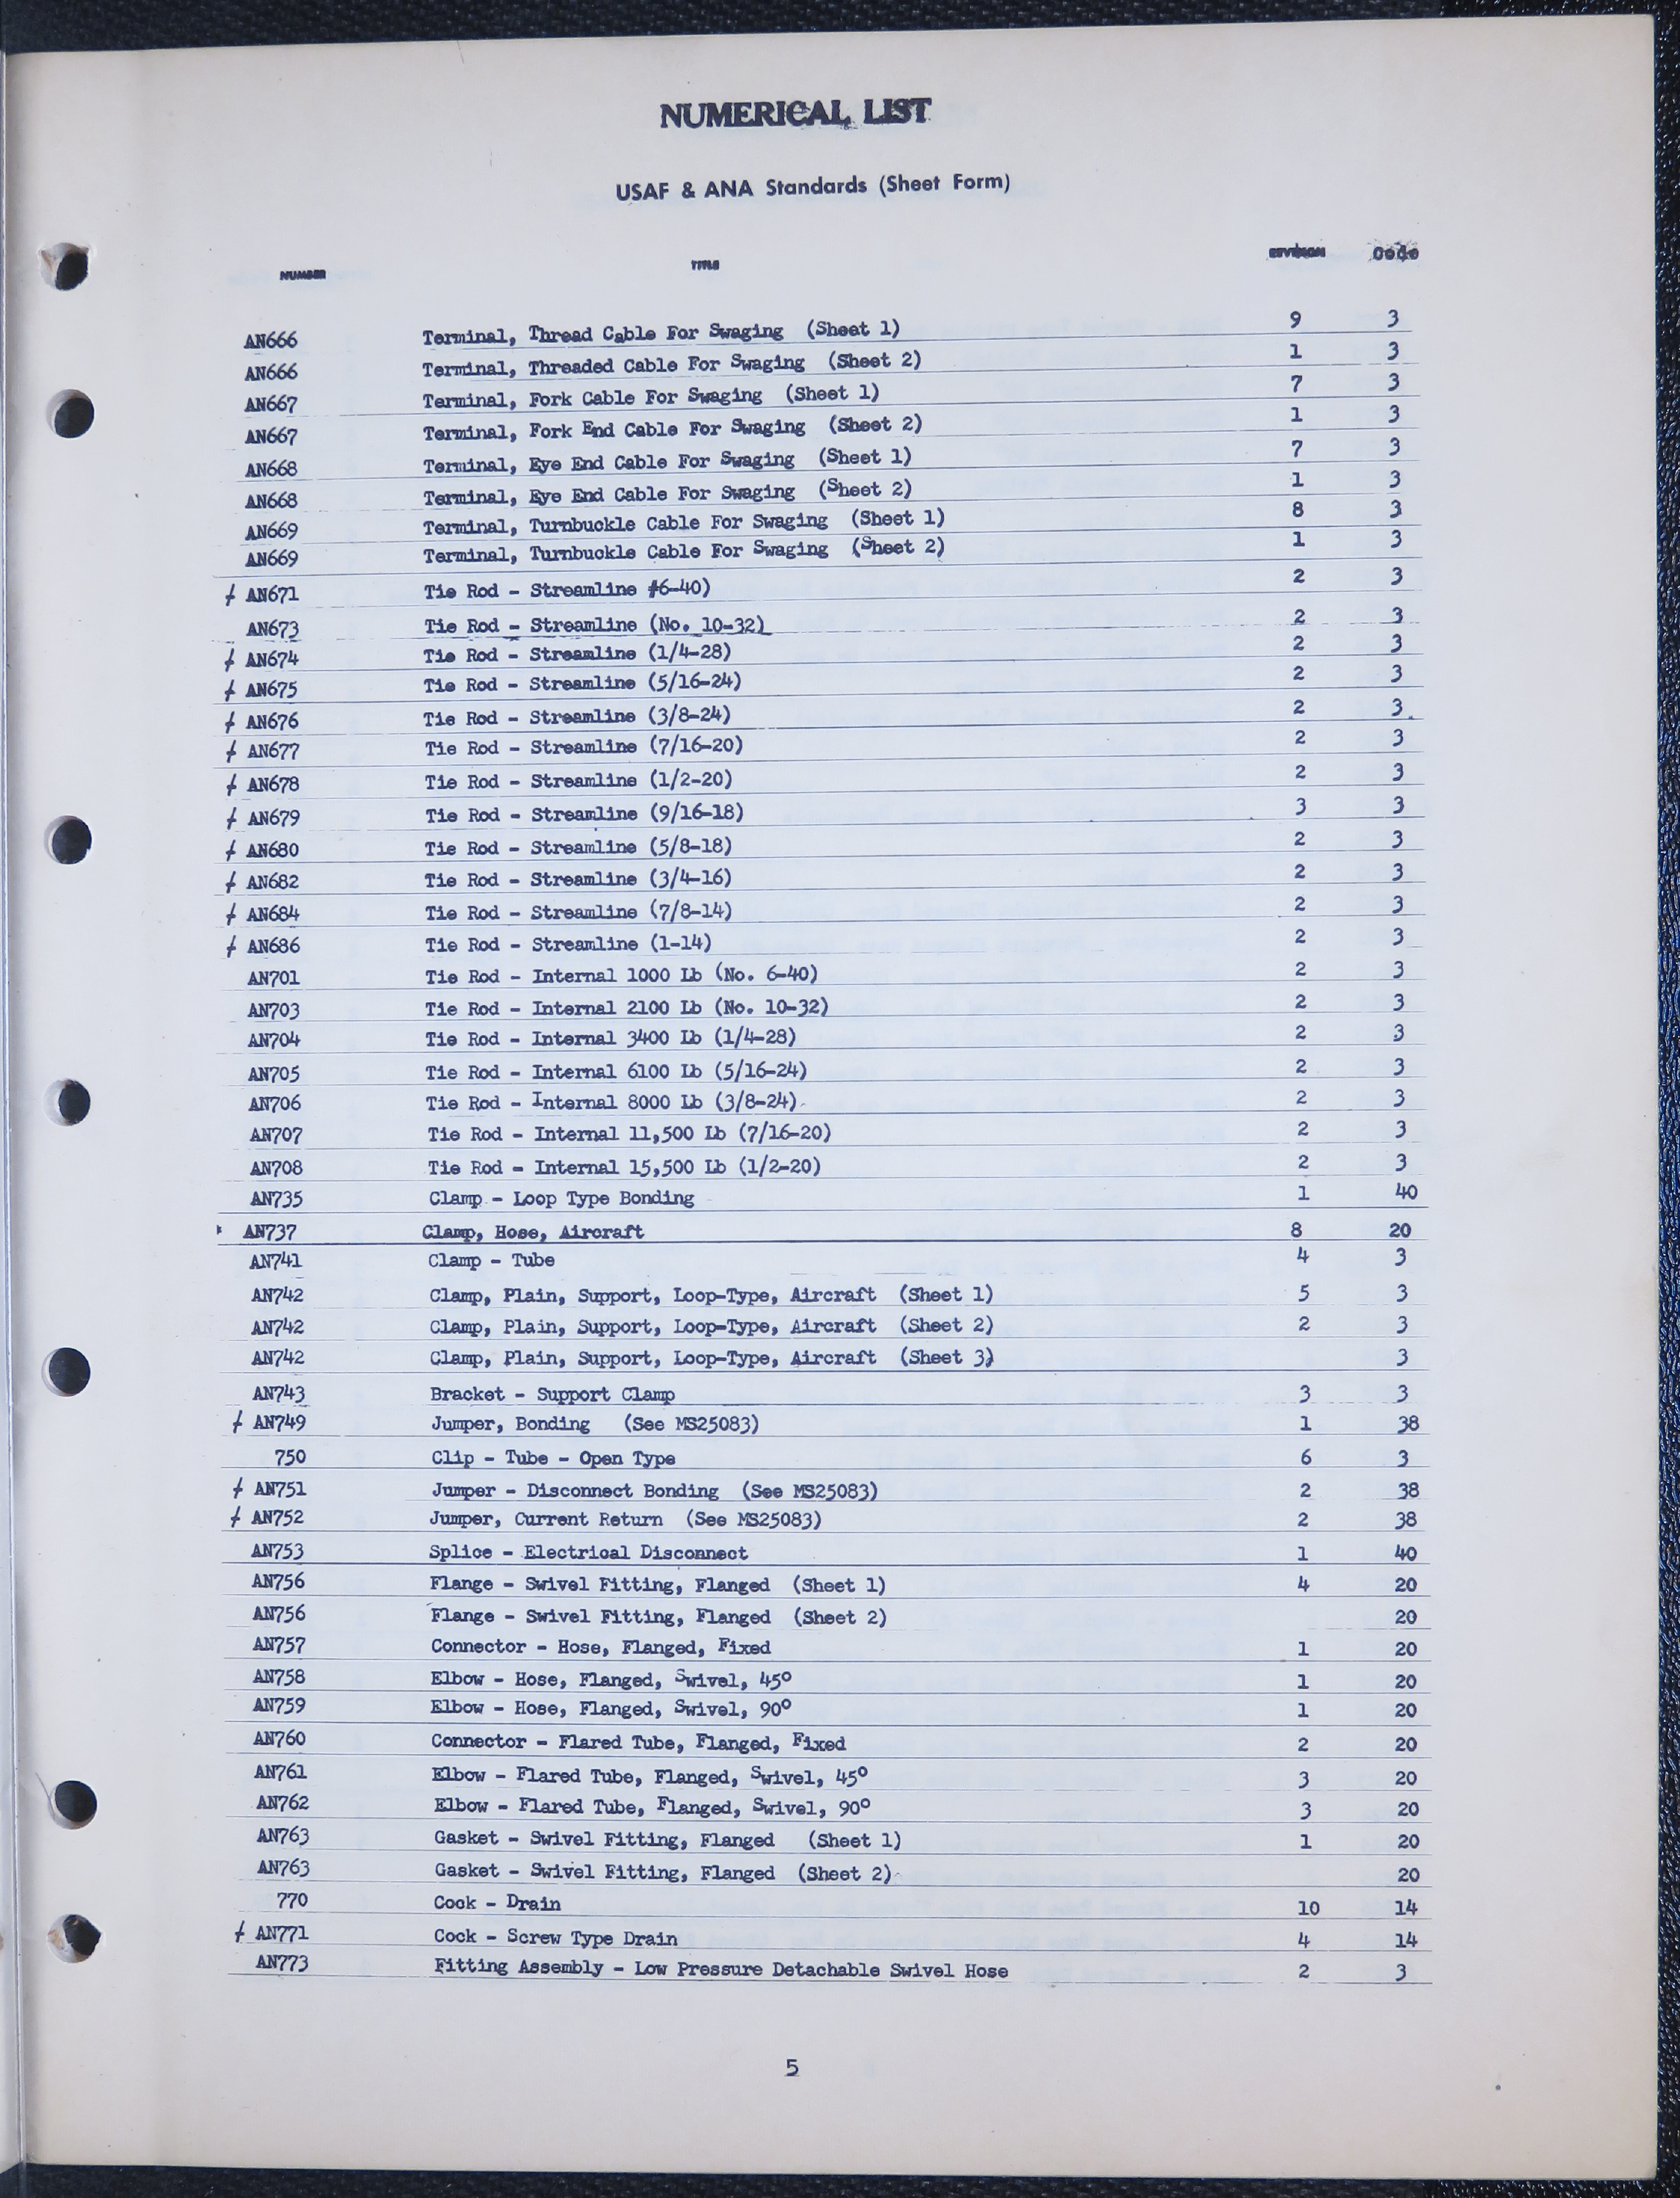 Sample page 7 from AirCorps Library document: Numerical List of US Air Force - Navy Aeronautical Military (MS) Standards